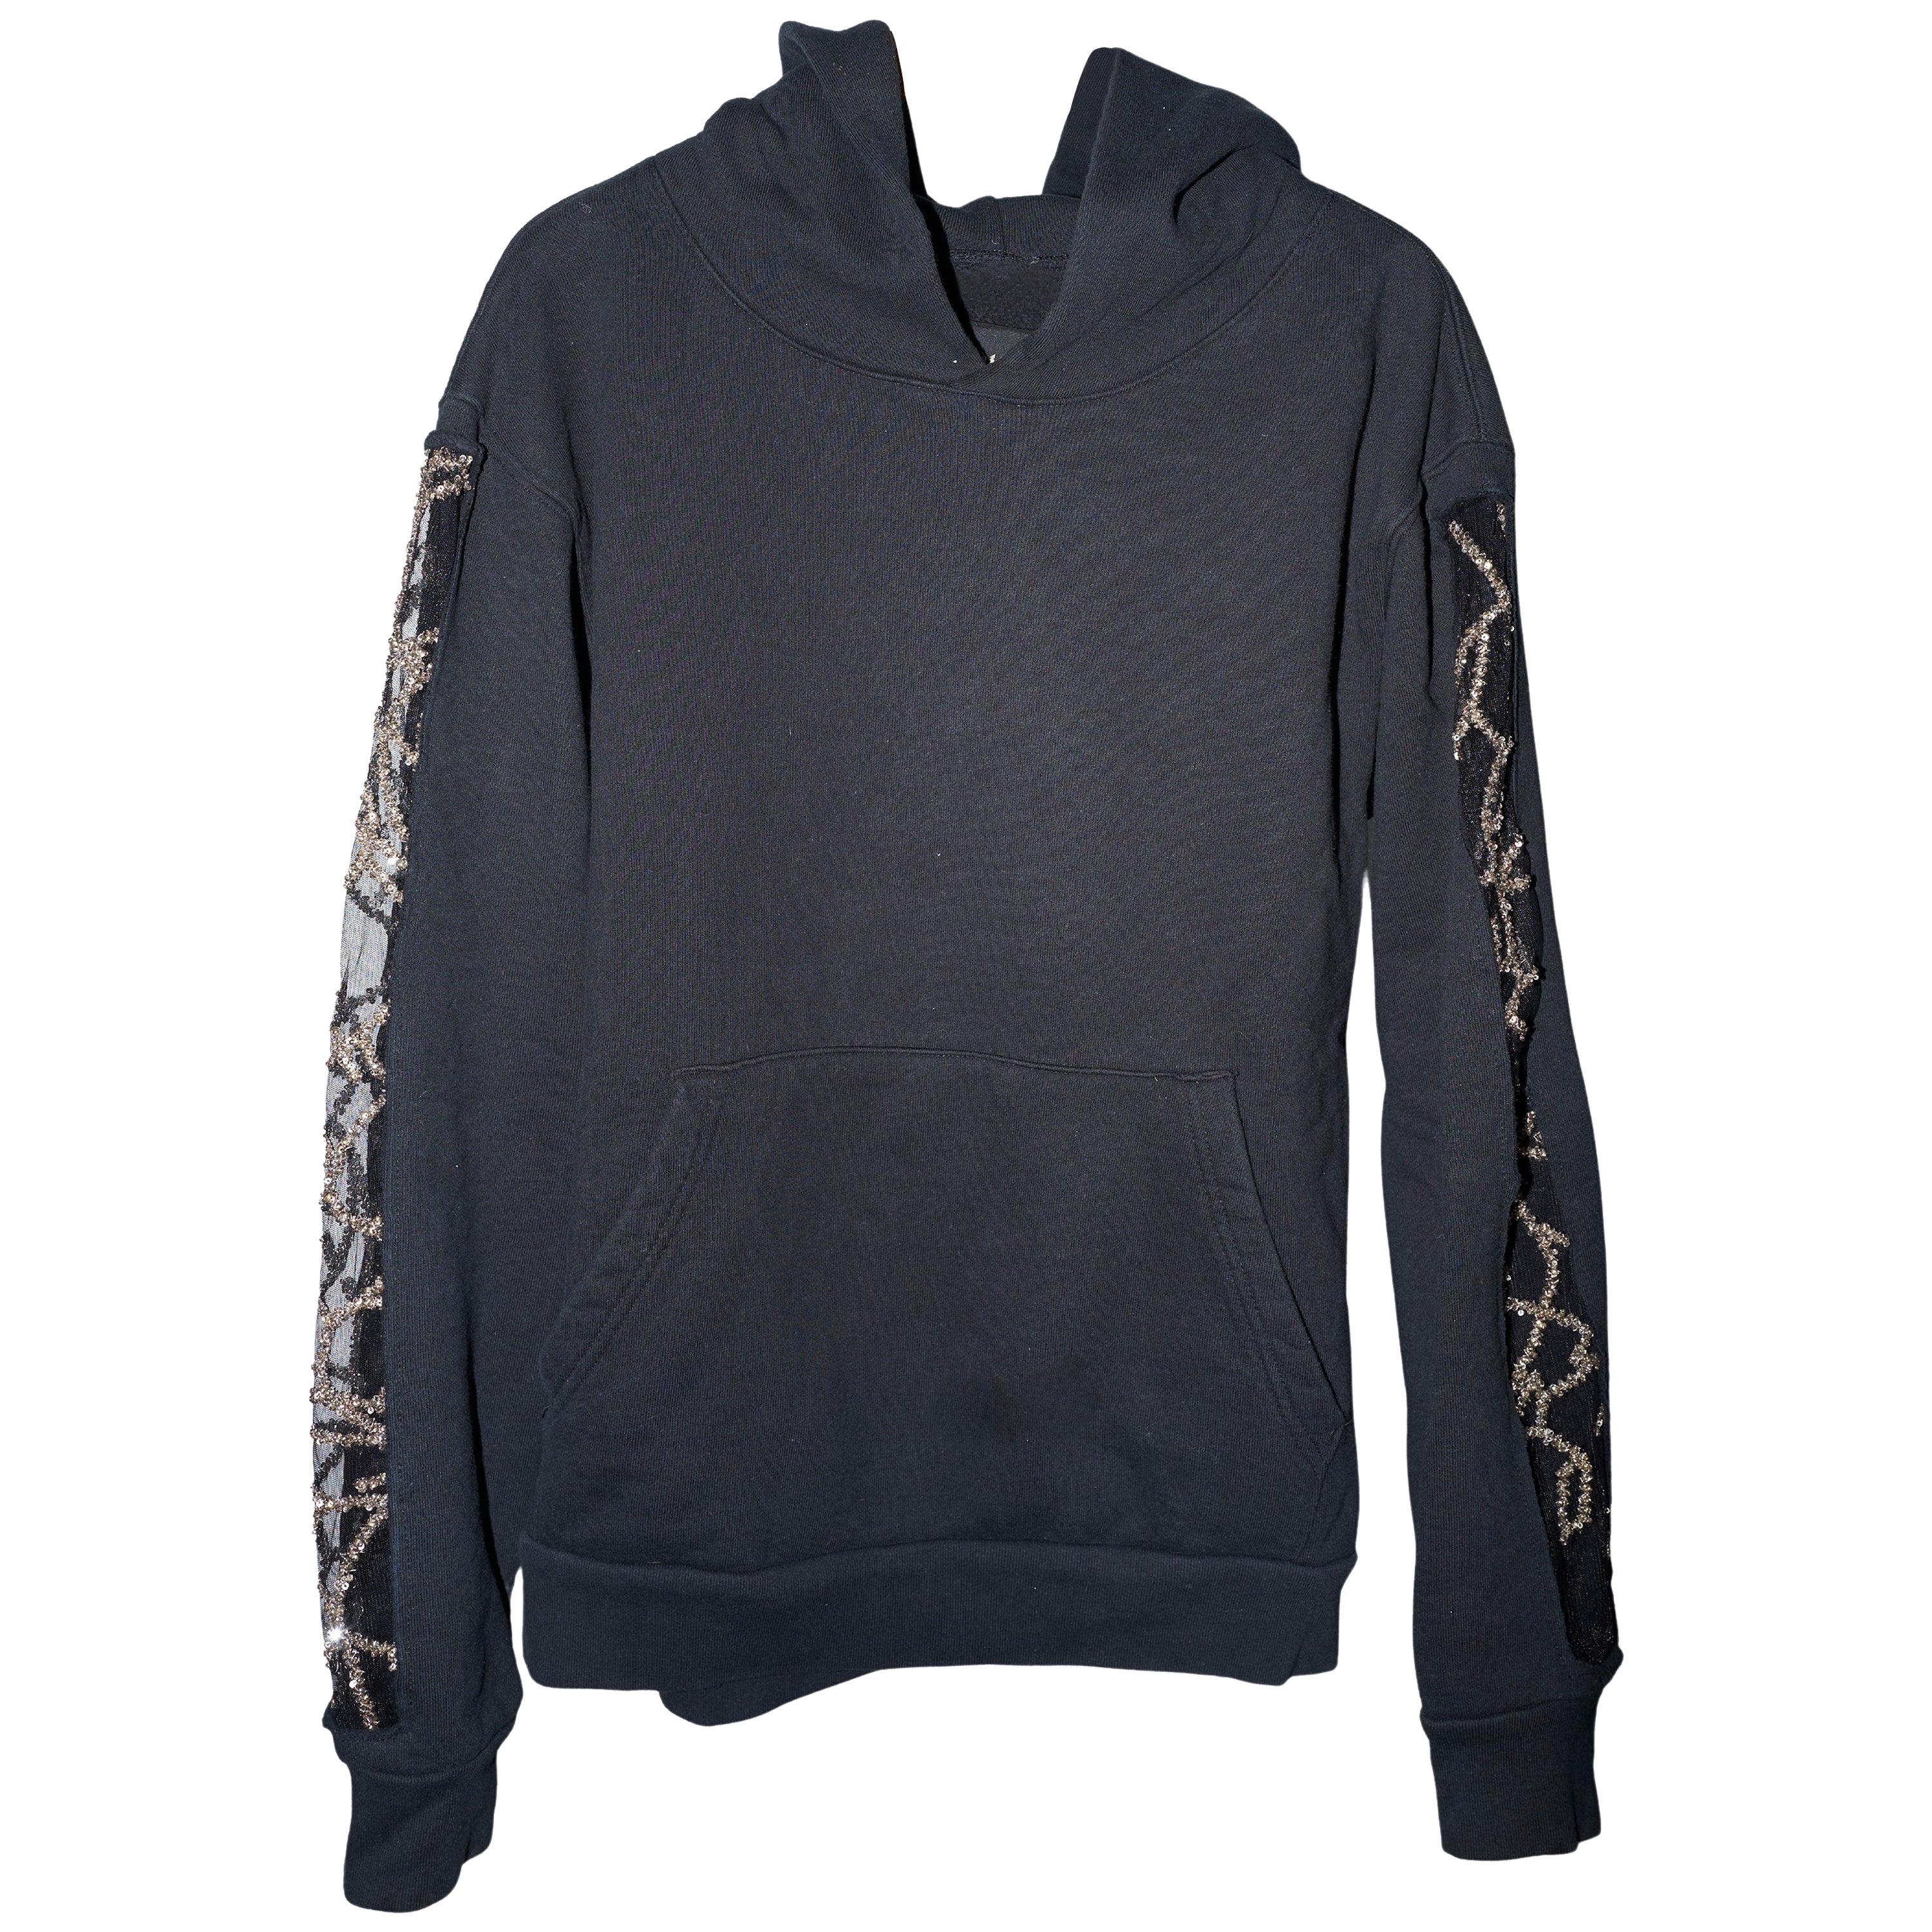 Brand: J Dauphin
Black Hoodie Sweatshirt Transparent Sheer See- Through Mesh Chrystal Embroidery J Dauphin
Material: 100% Organic Cotton 

Available in Size Large

Express a hybrid of easy-luxe and bourgeoisie jet-set look. Effortless and versatile,